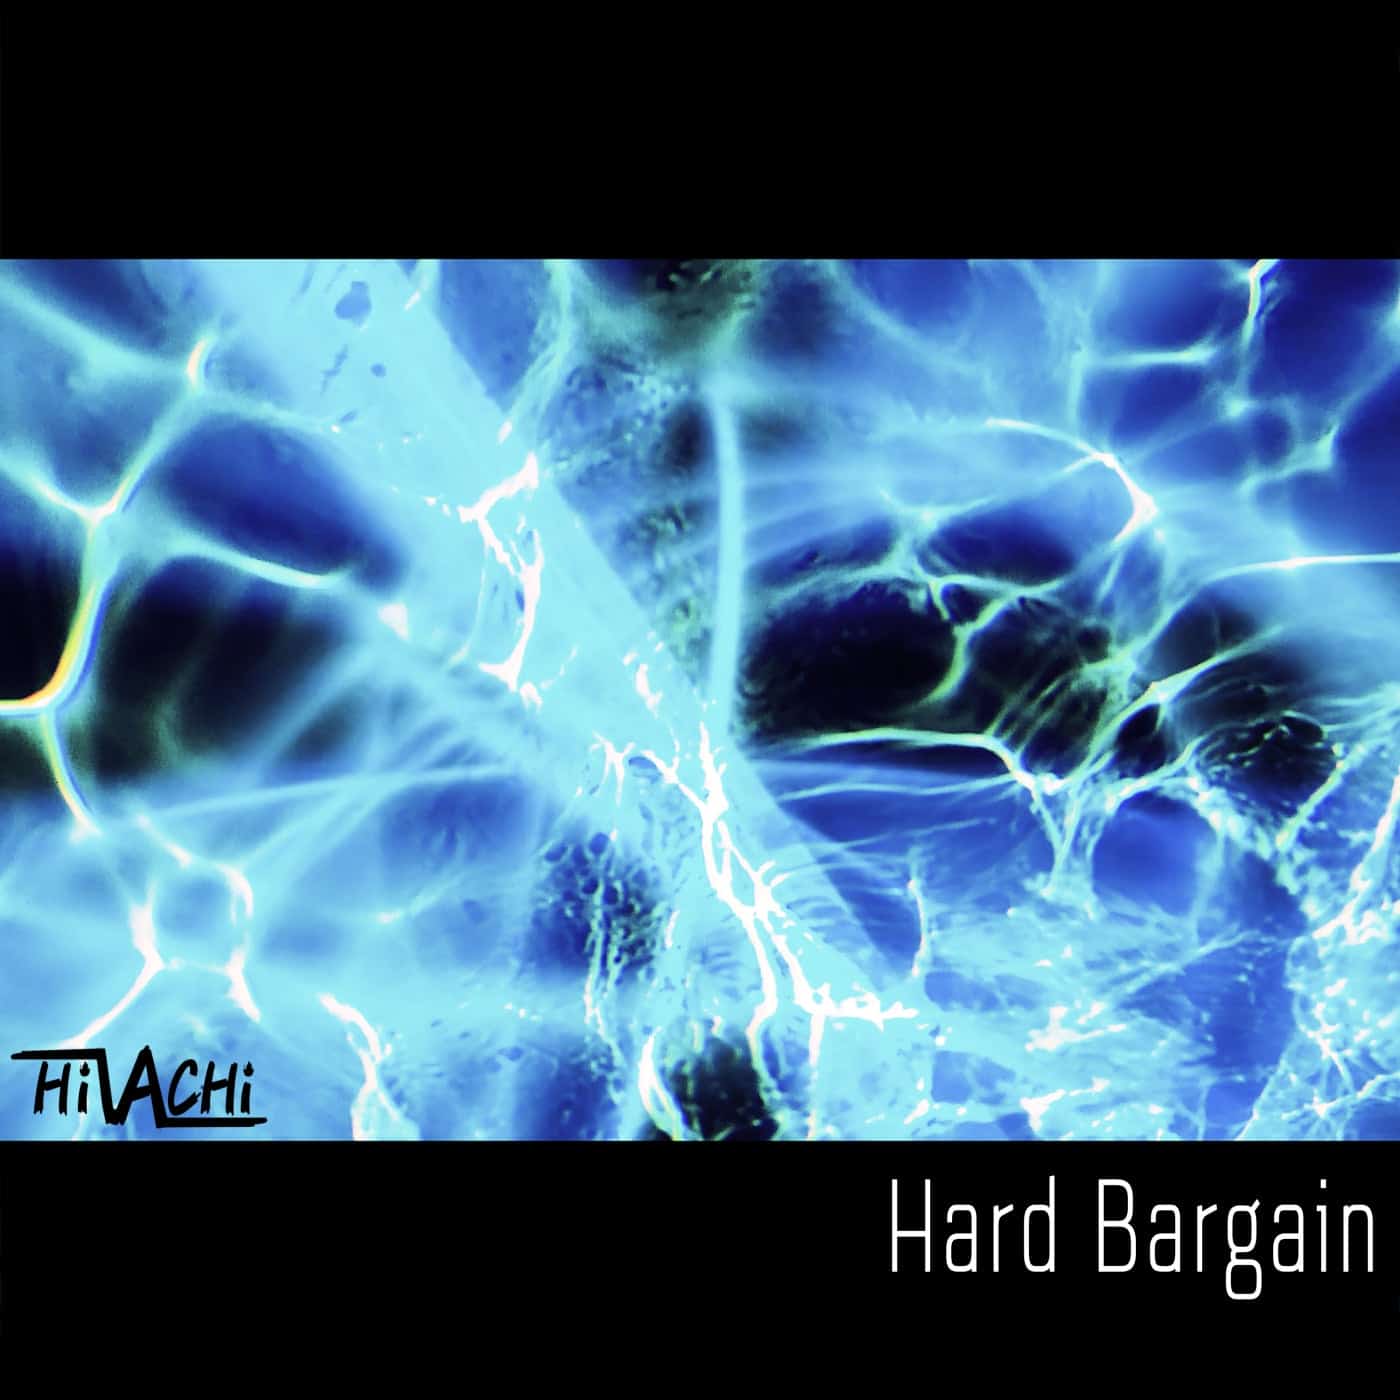 HiVACHi released “Hard Bargain” single music album from Force Energy Records